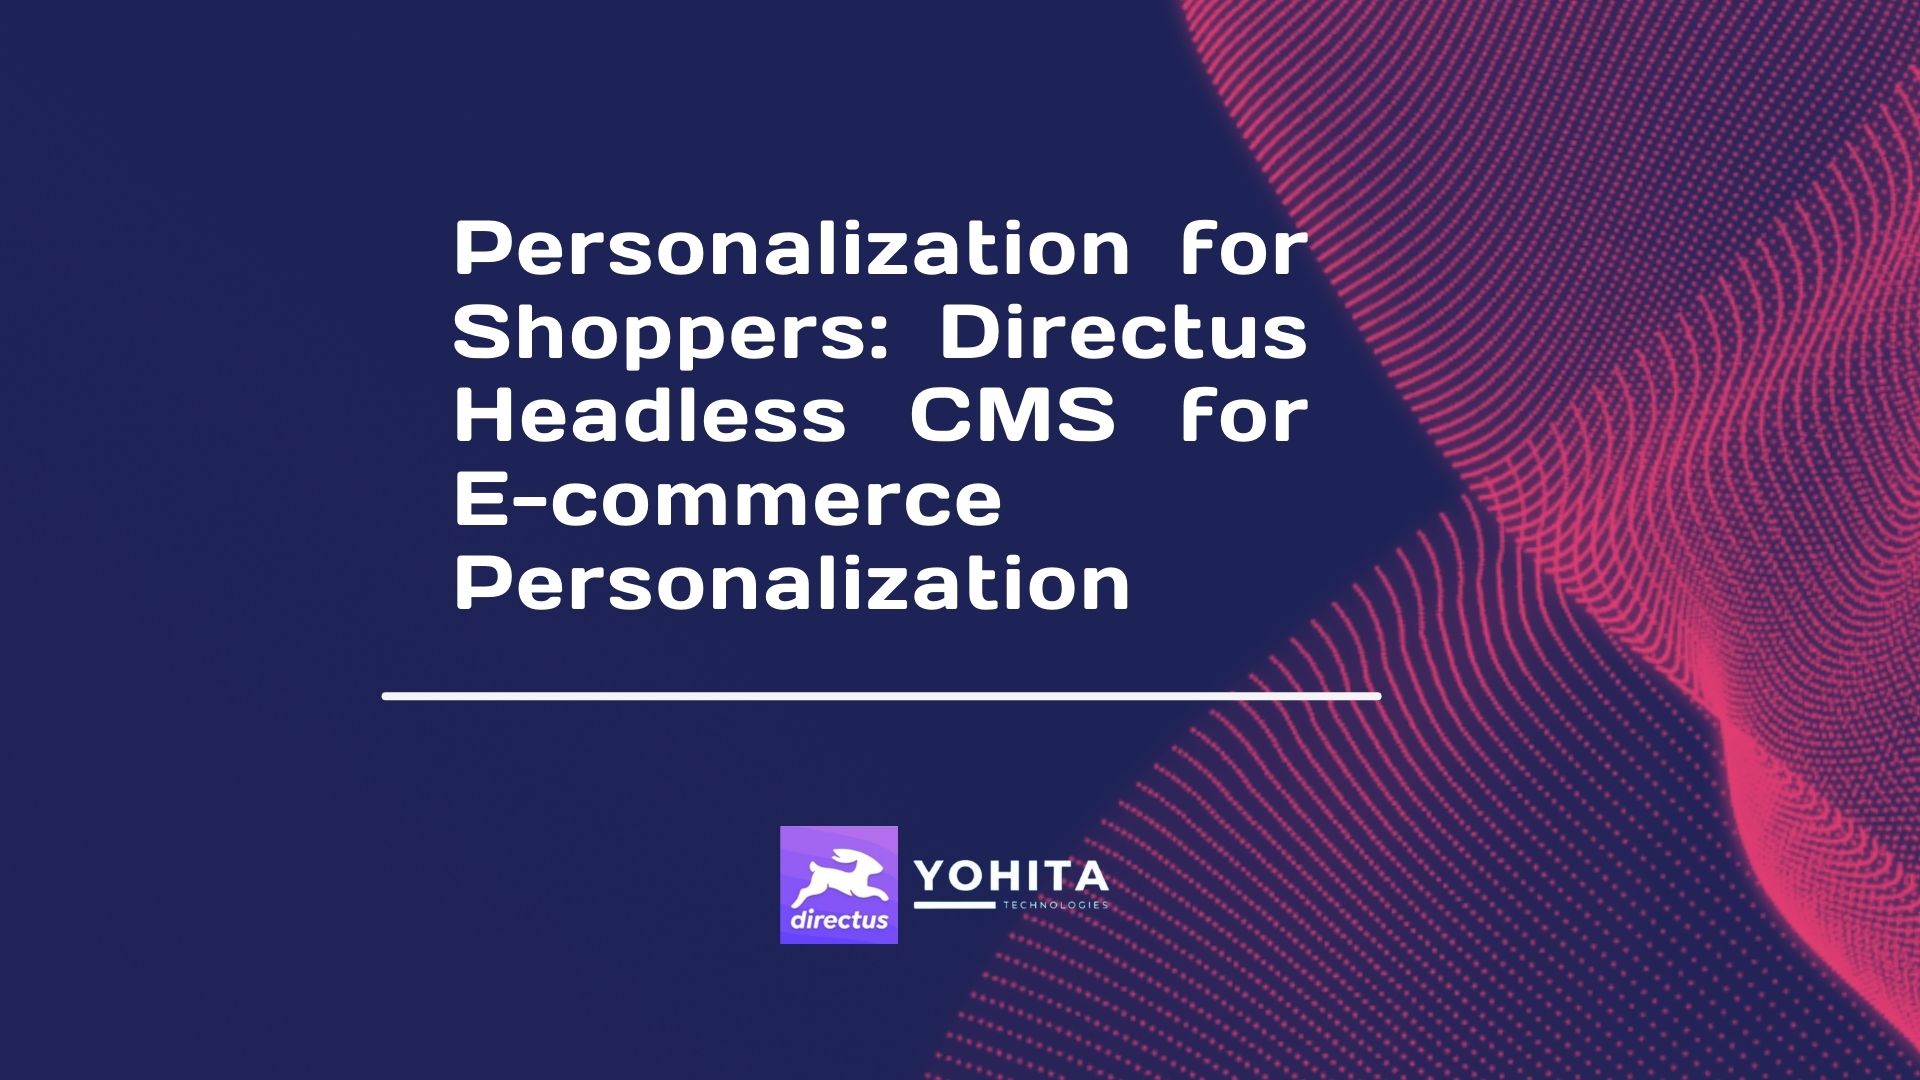 Personalization for Shoppers: Directus Headless CMS for E-commerce Personalization